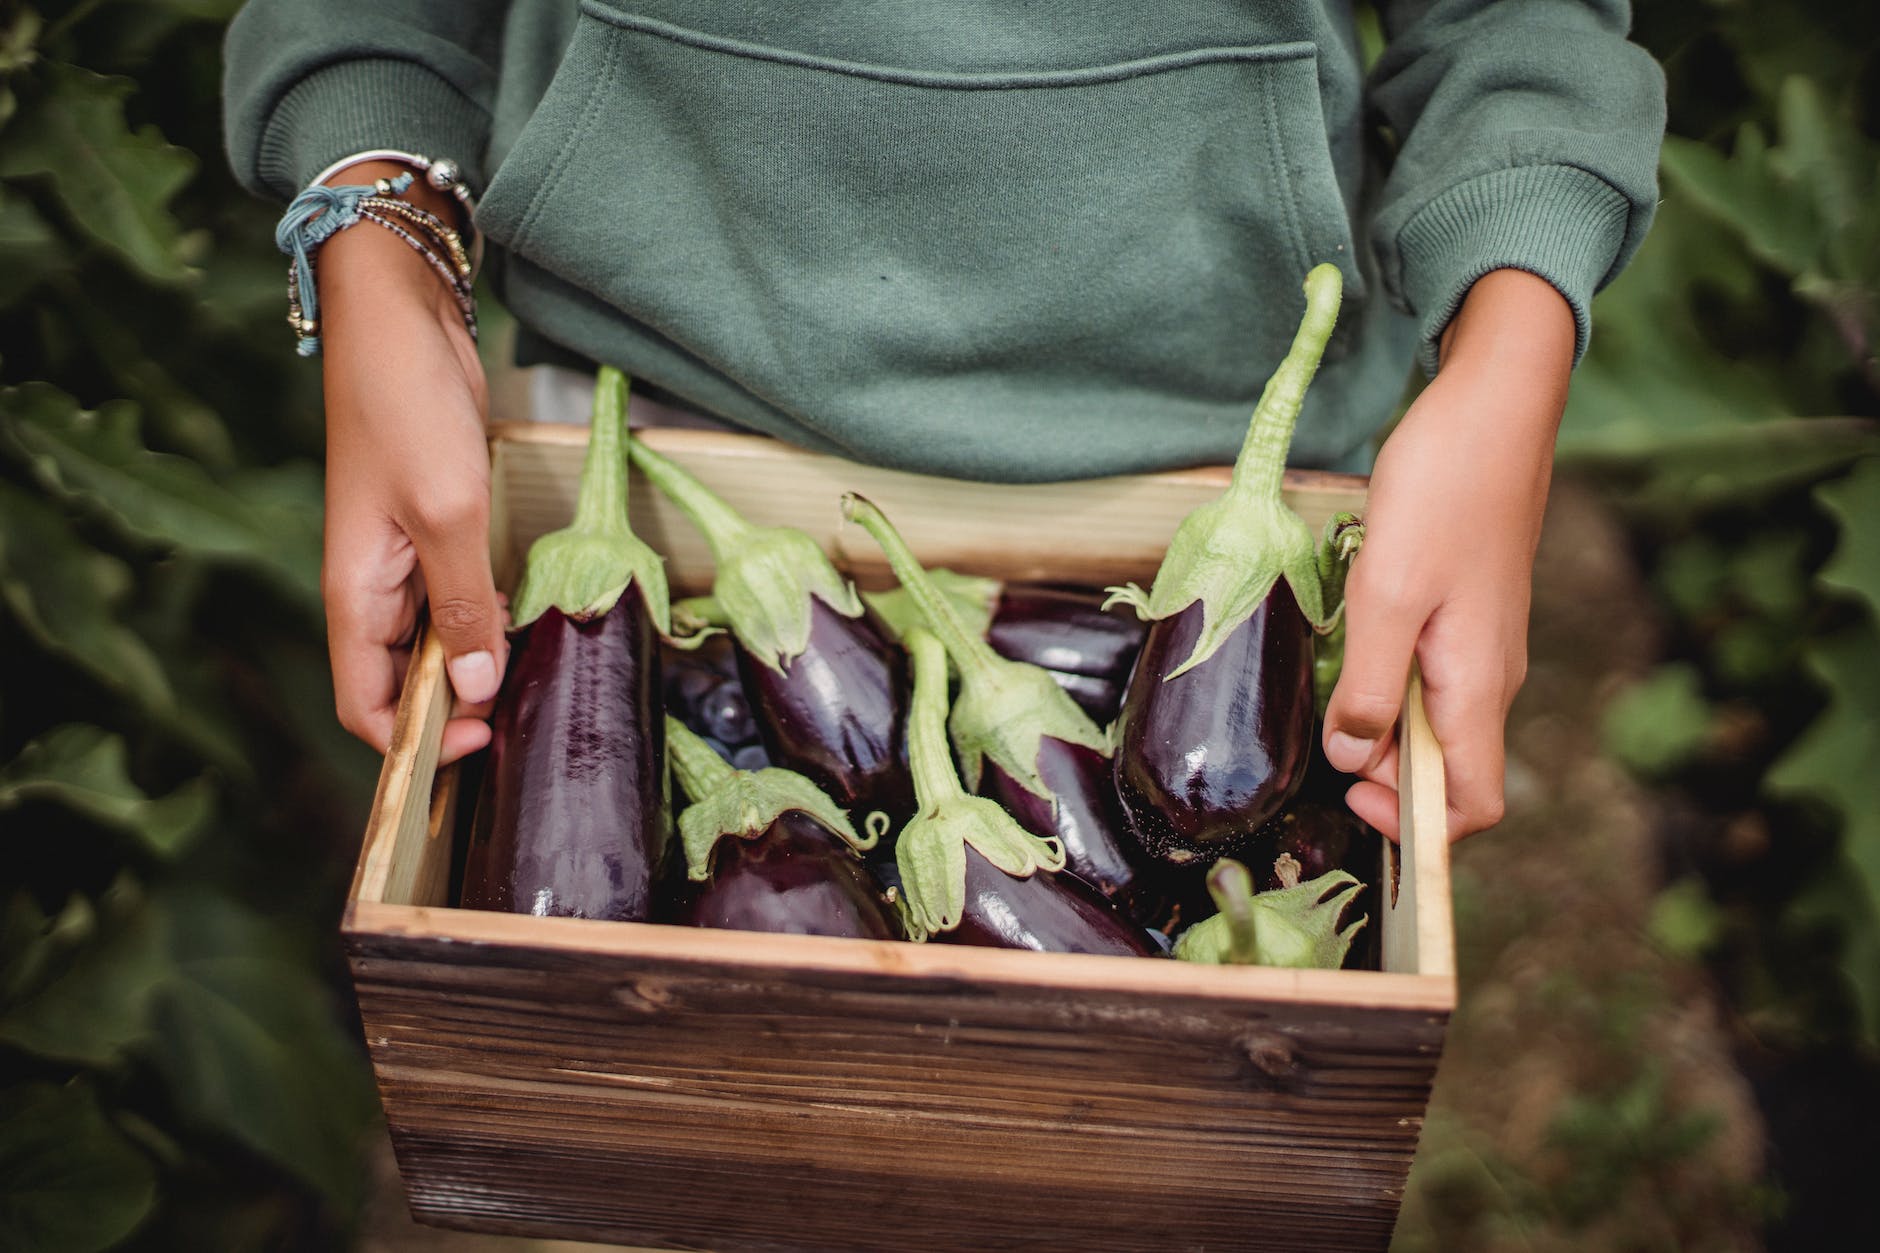 crop harvester with fresh eggplants in box